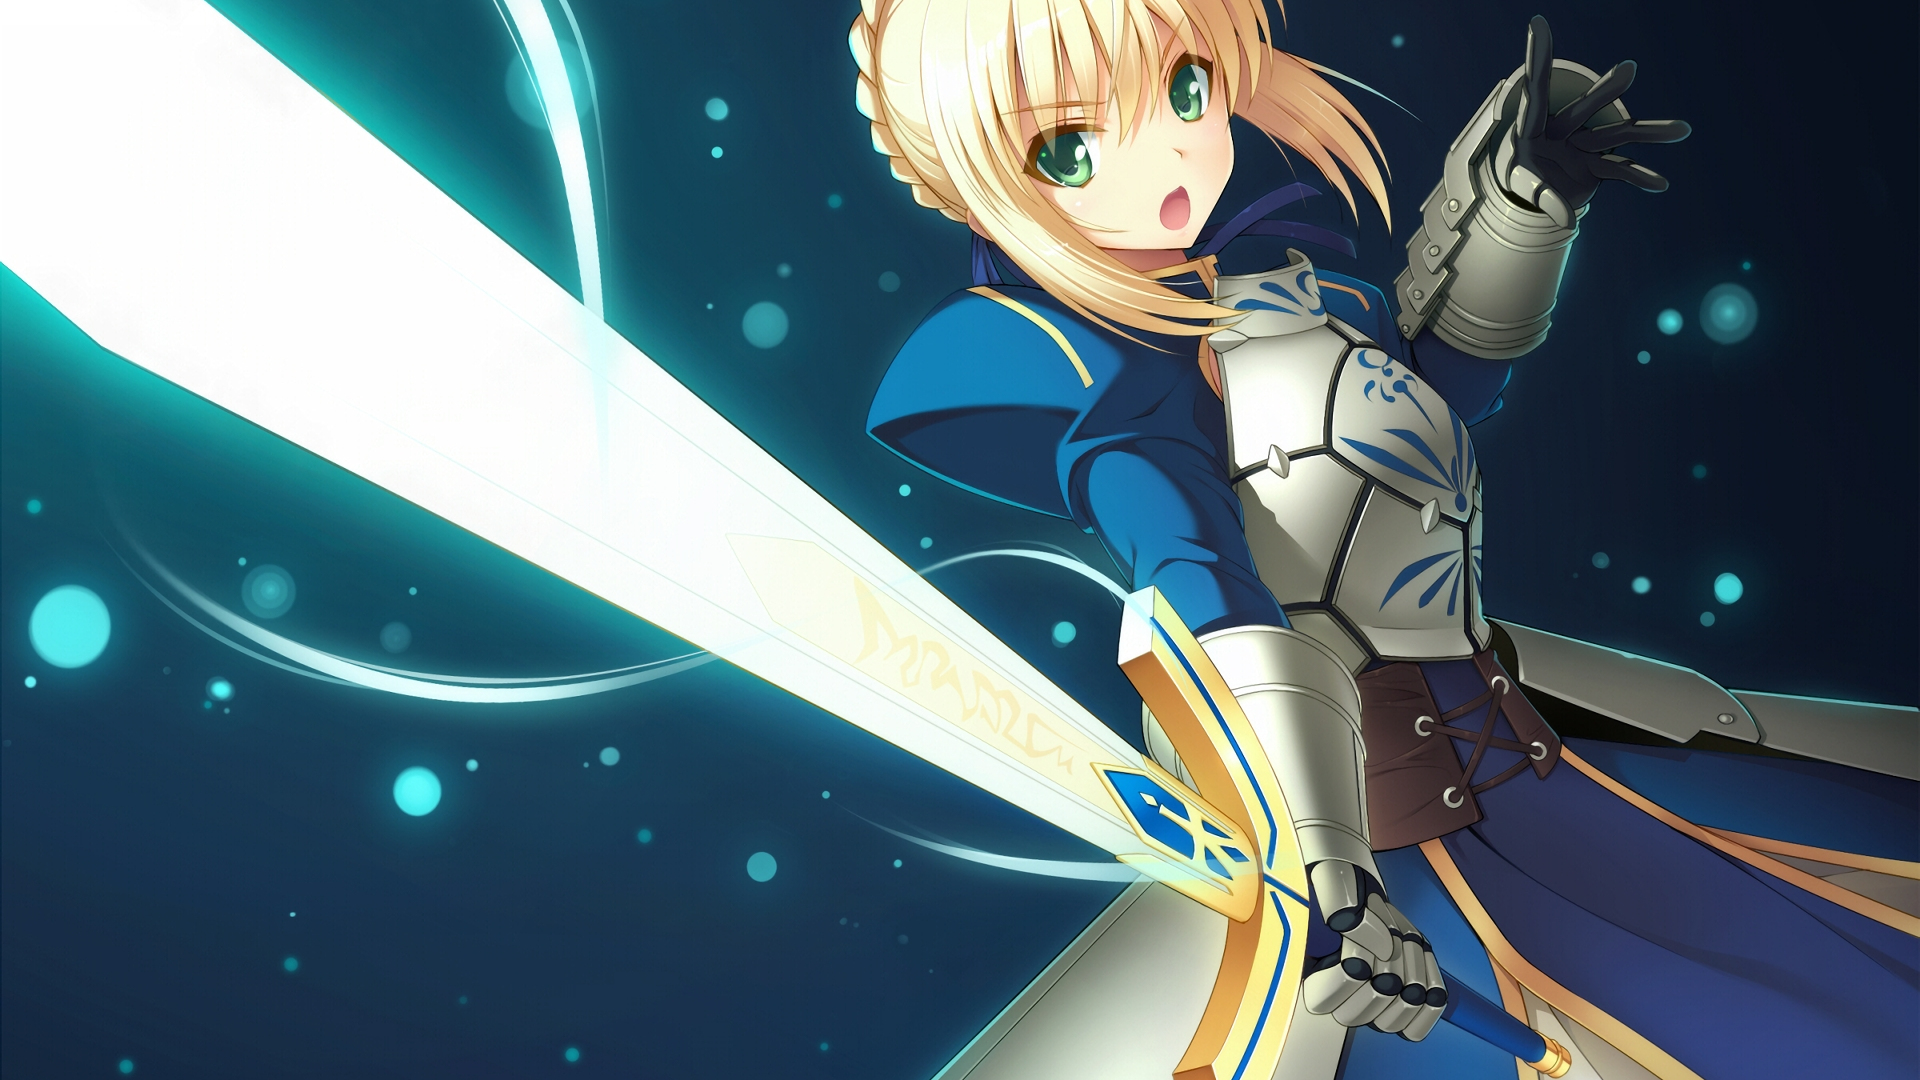 HD wallpaper woman holding sword anime illustration look girl pose  weapons  Wallpaper Flare